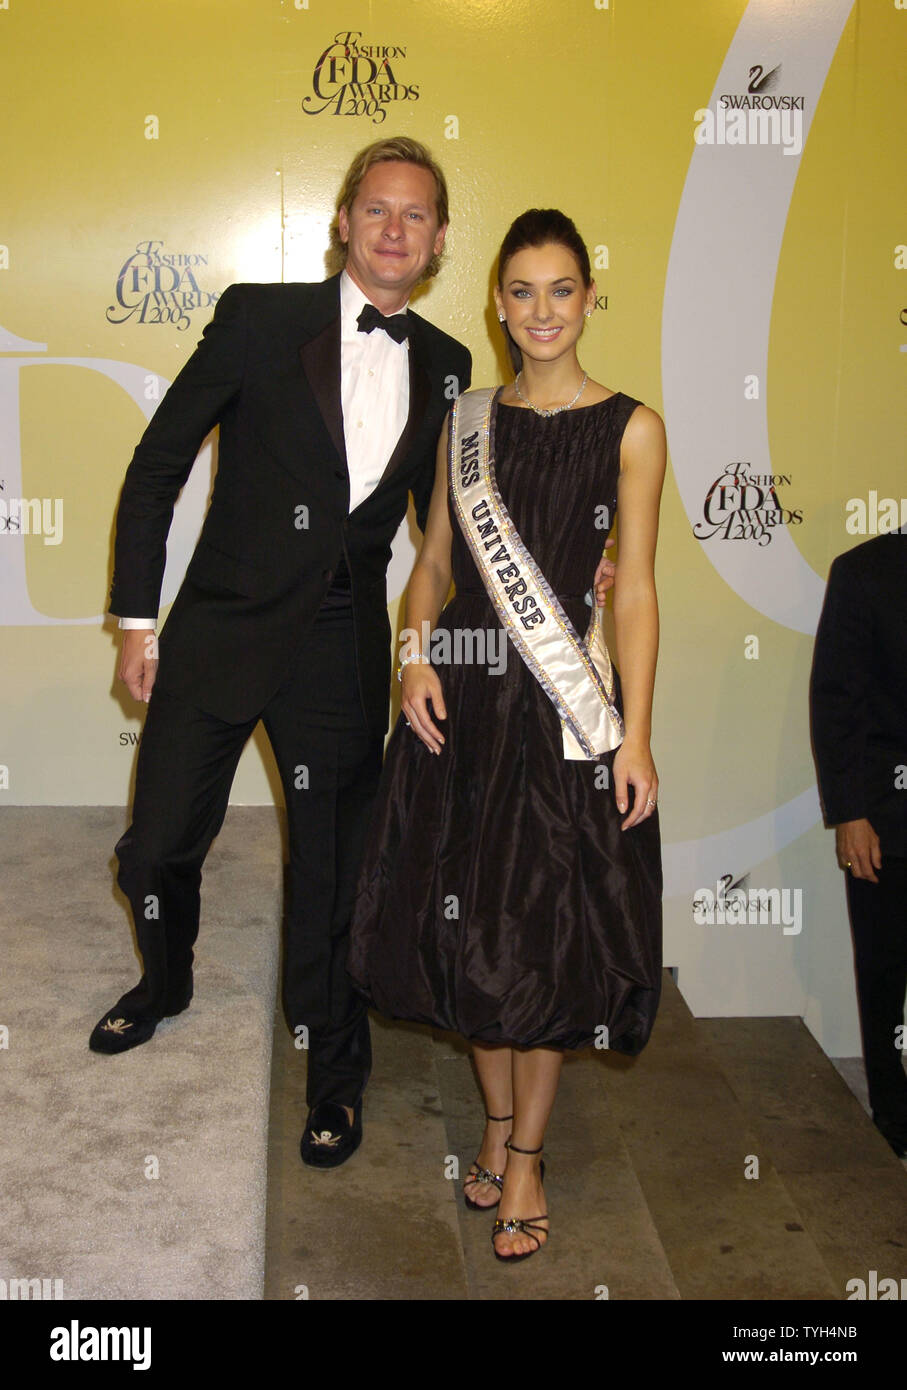 Carson Kressley and Miss Universe Natalie Glebova arrive at The 2005 CFDA Awards at The New York Public Library in New York on June 6, 2005 .    (UPI Photo/Robin Platzer) Stock Photo